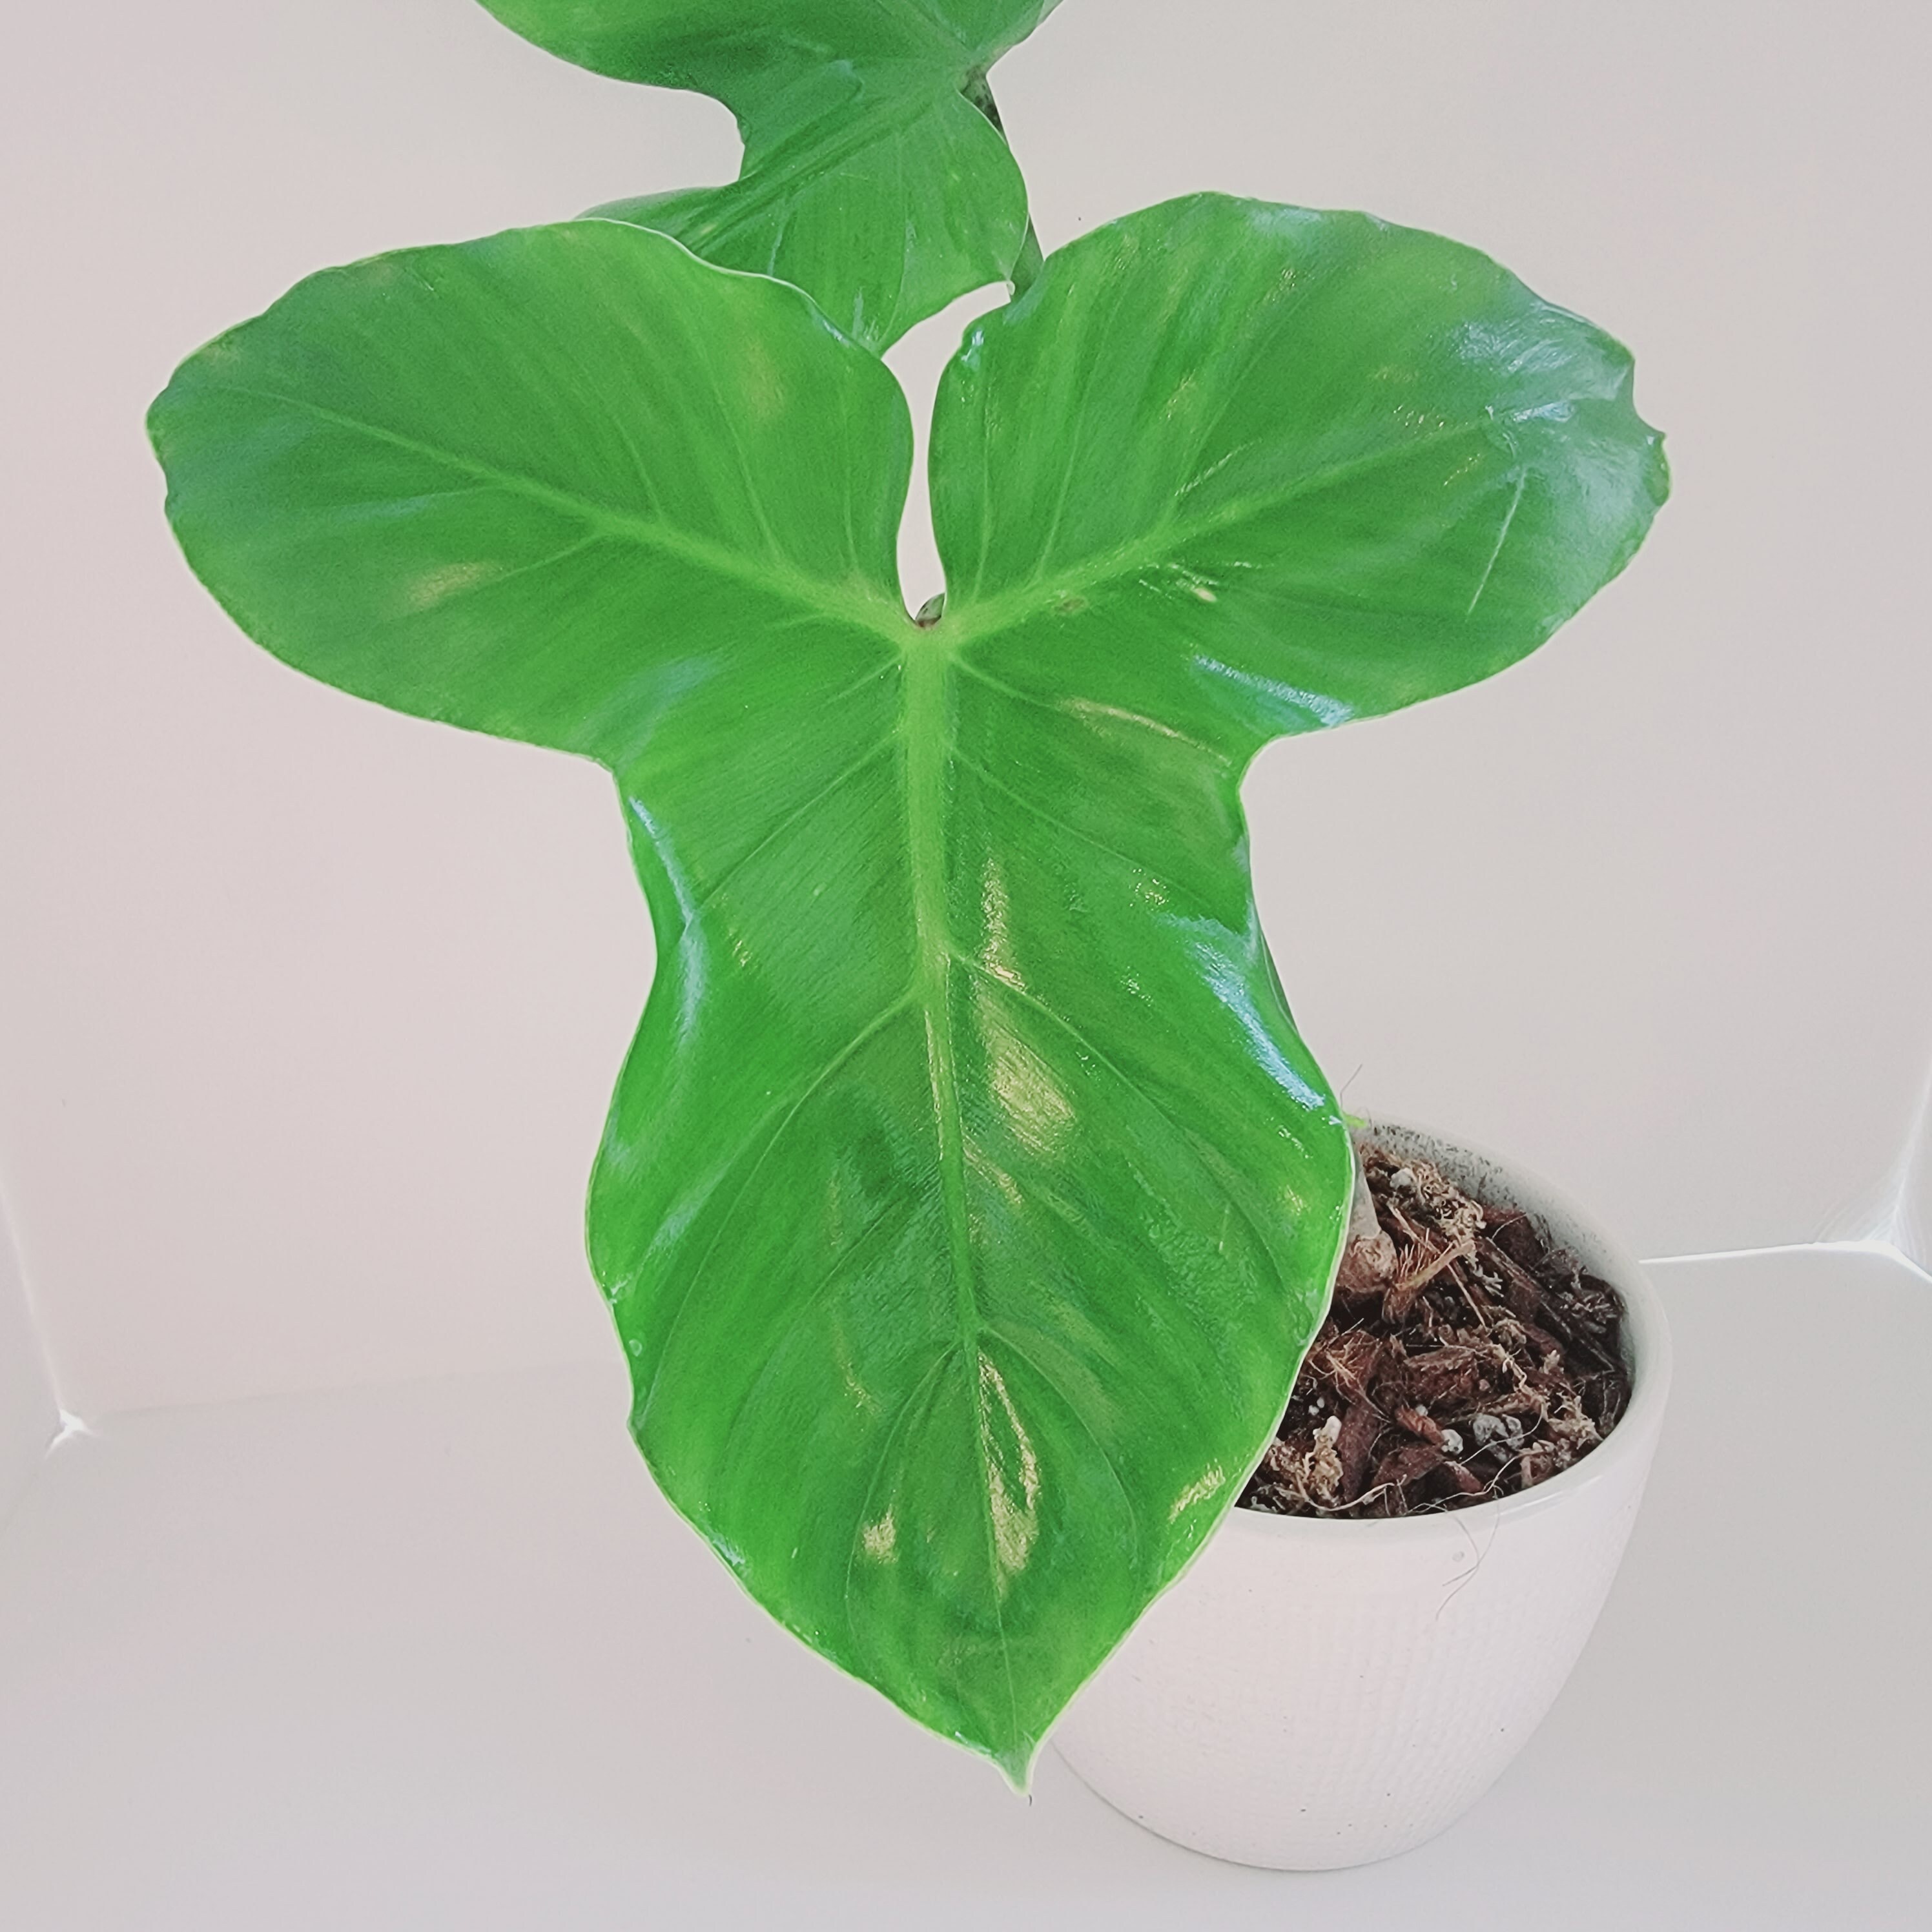 Monstera Deliciosa Cutting RARE FRUIT Bearing GIANT Mature Plant,  Guaranteed Over 2 Inches Thick Double Nodes New Leaves Fenestrated 